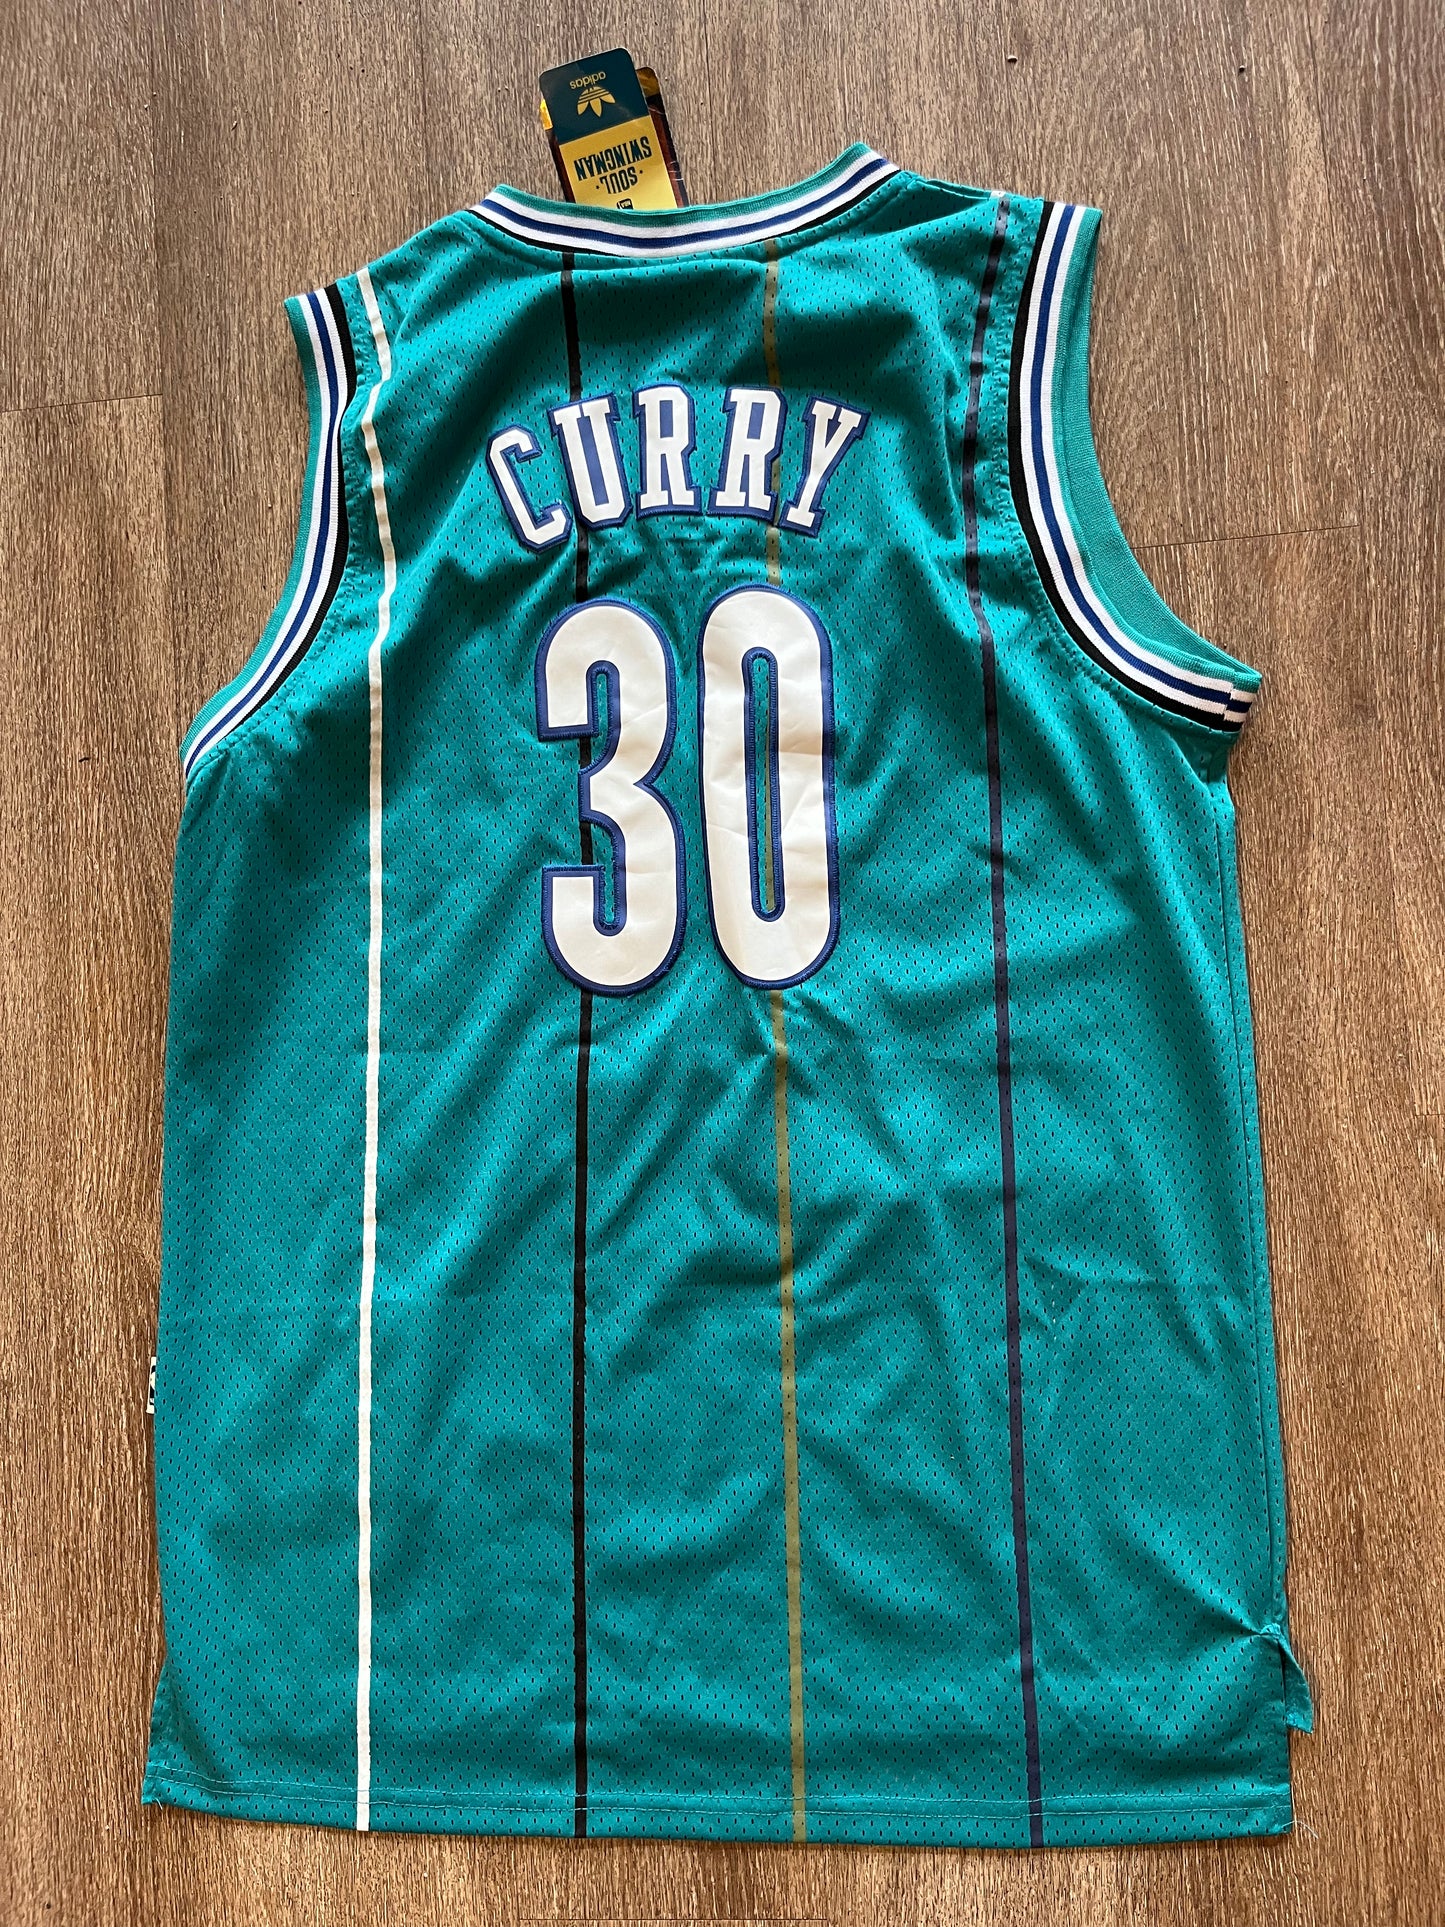 curry hornets jersey